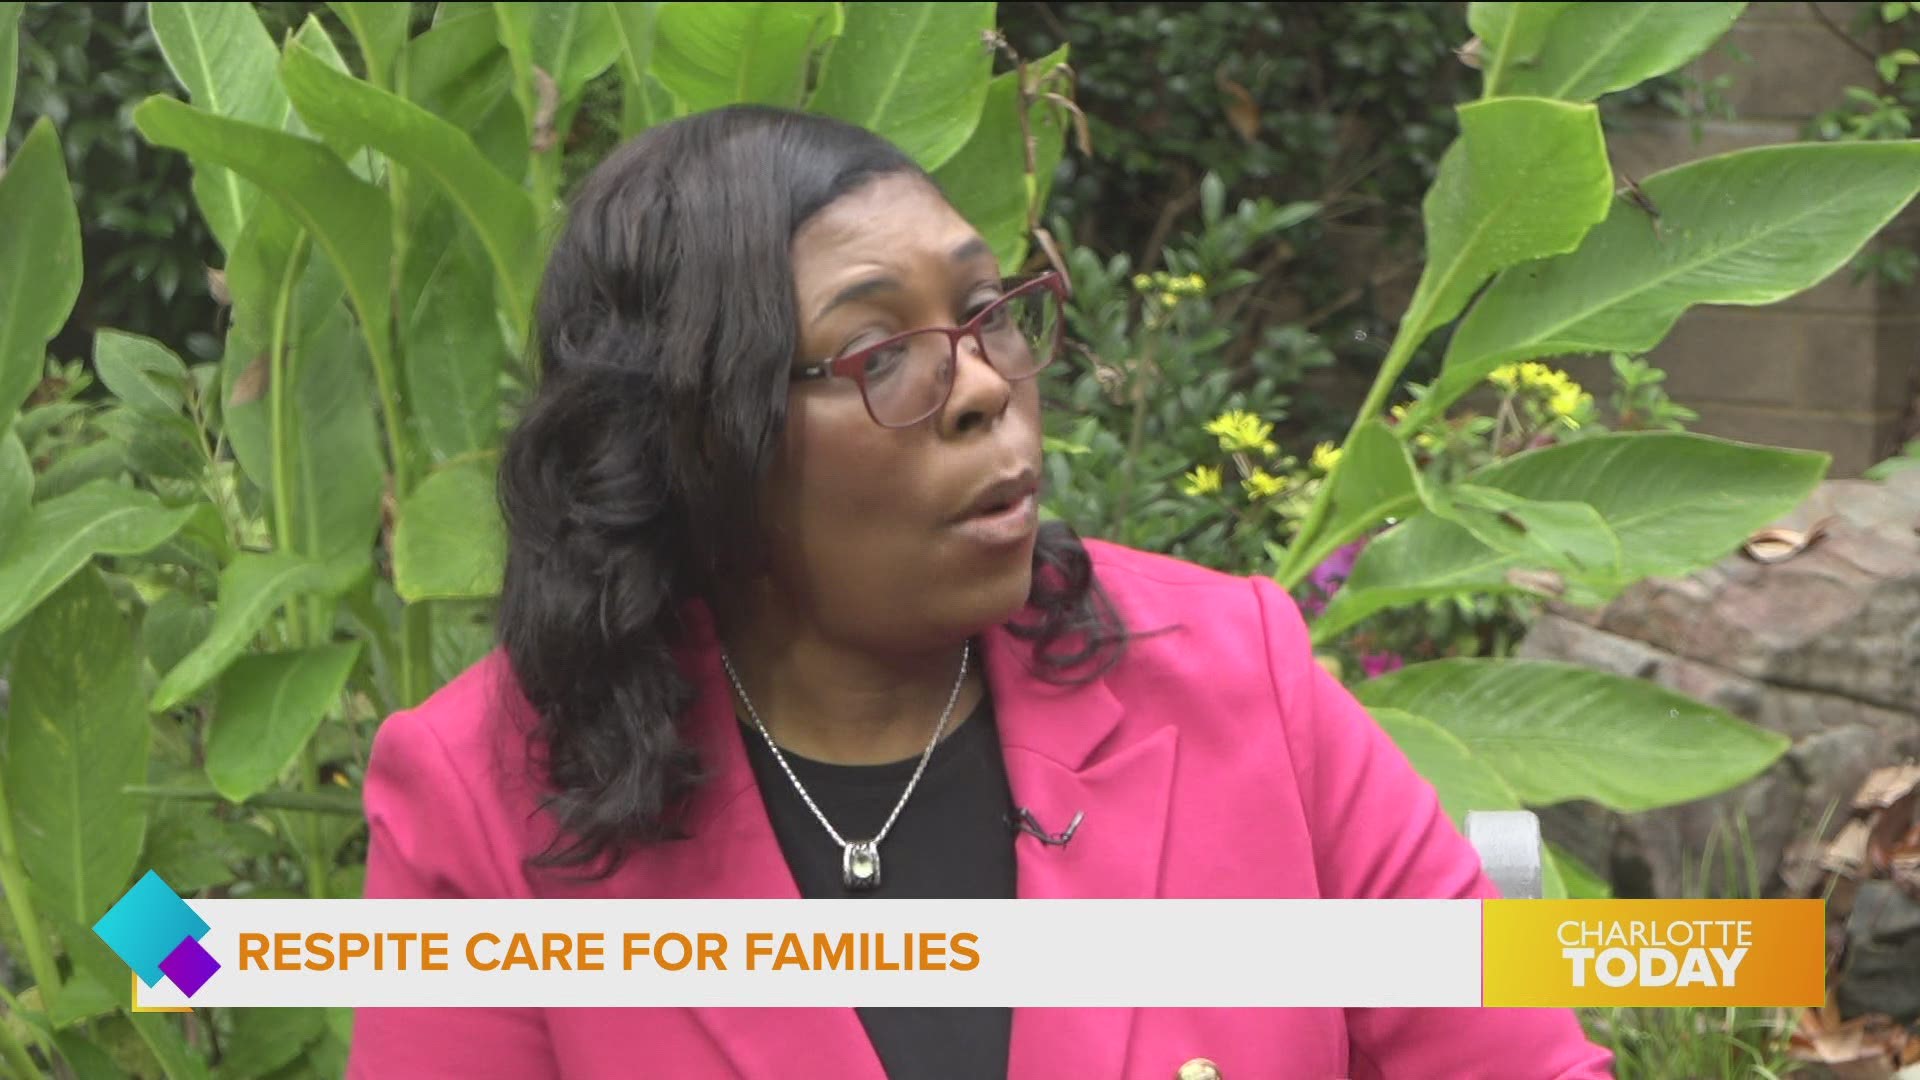 Gentle Shepherd Care can help families caring for loved ones at home